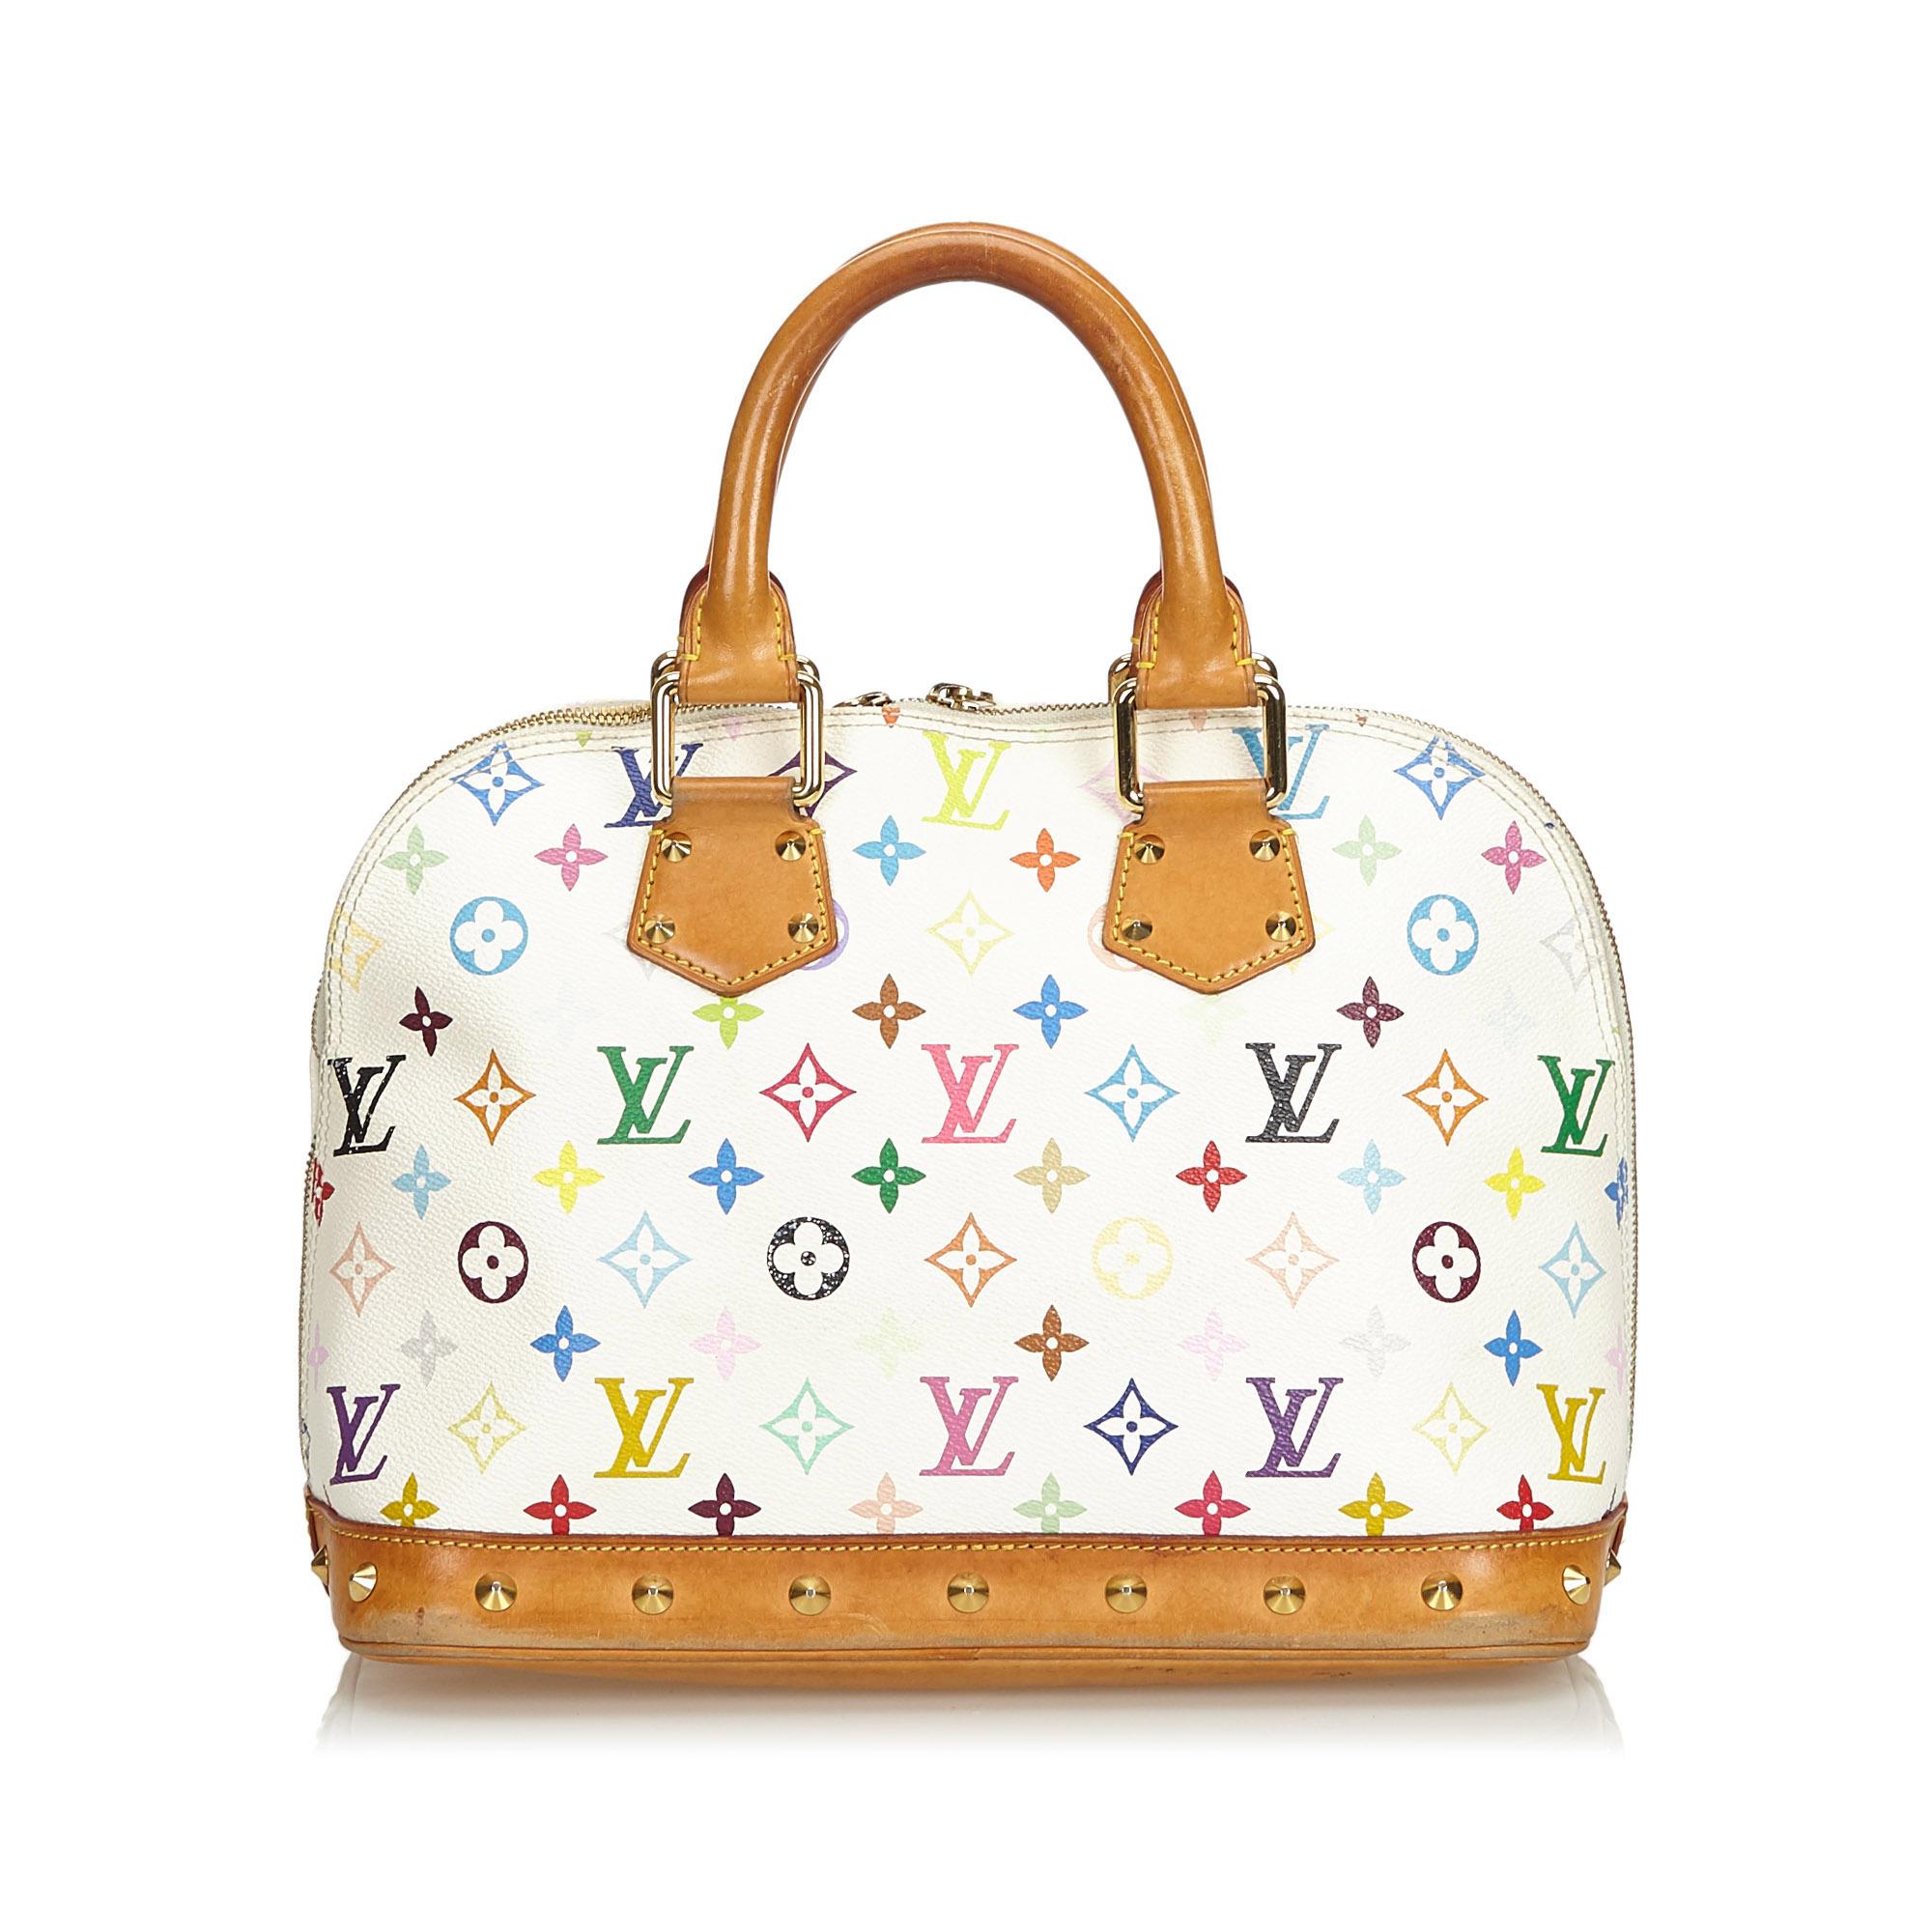 Vintage Authentic Louis Vuitton White Alma PM France SMALL  In Good Condition For Sale In Orlando, FL